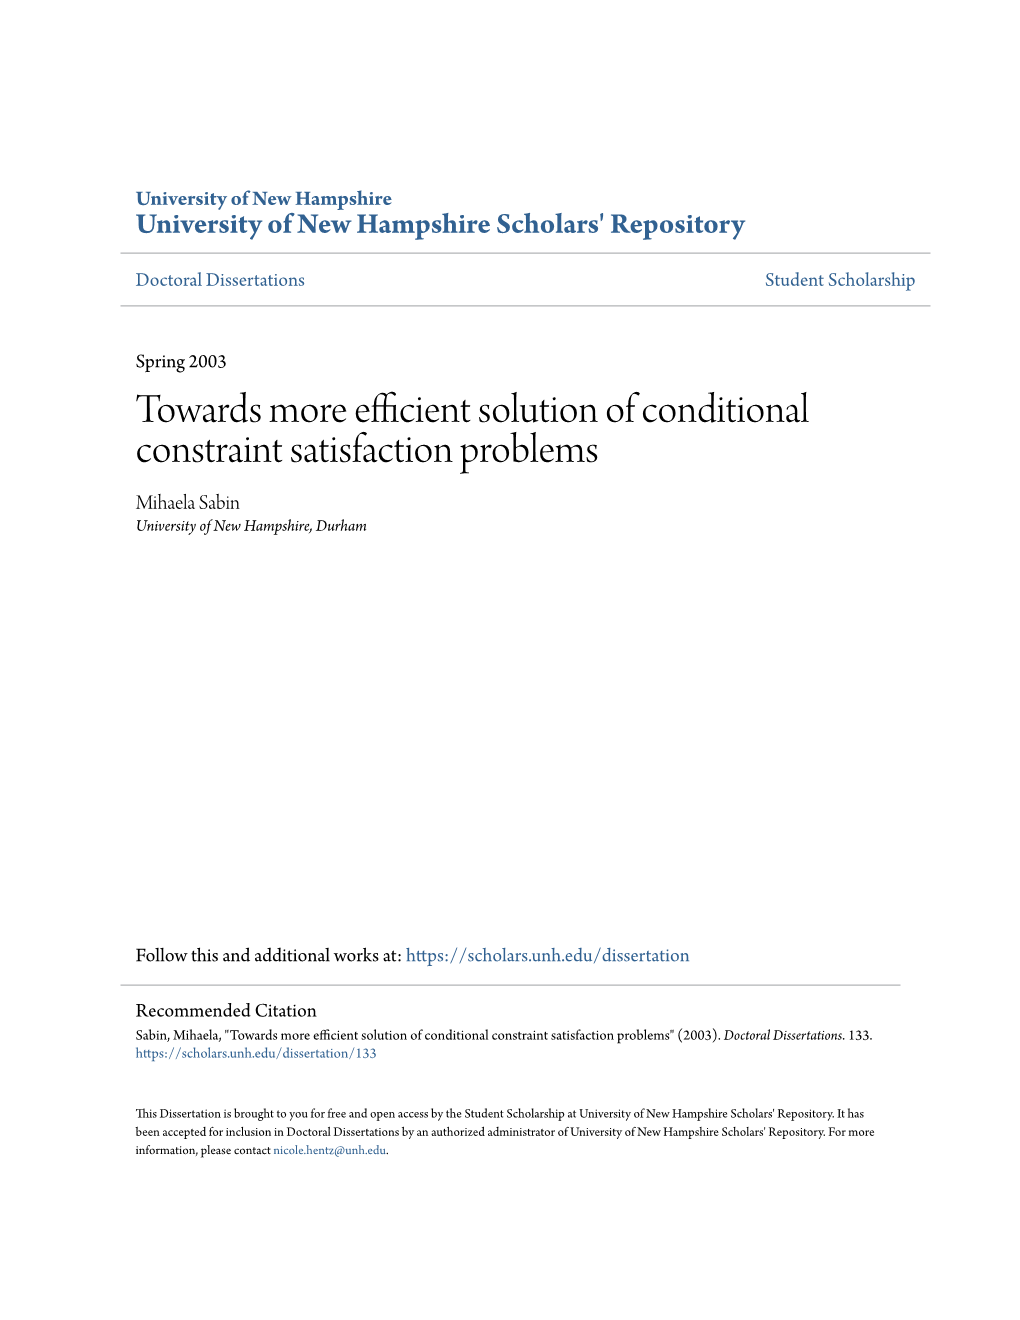 Towards More Efficient Solution of Conditional Constraint Satisfaction Problems Mihaela Sabin University of New Hampshire, Durham